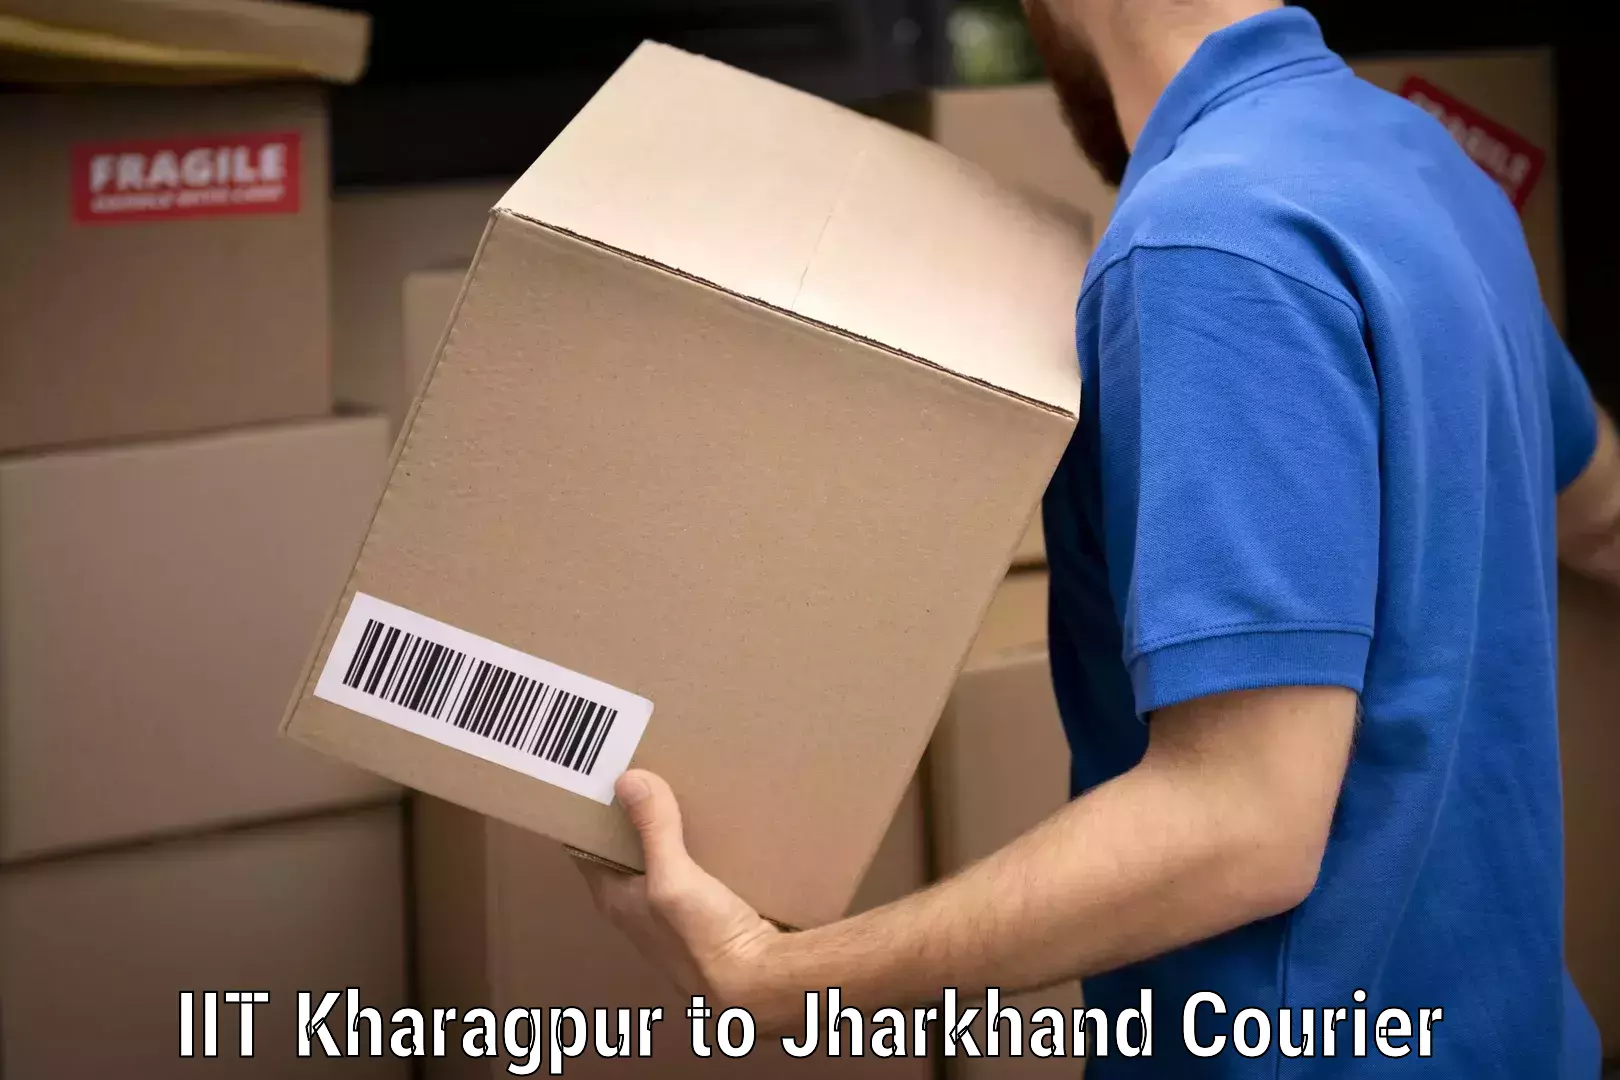 Specialized moving company IIT Kharagpur to Jharkhand